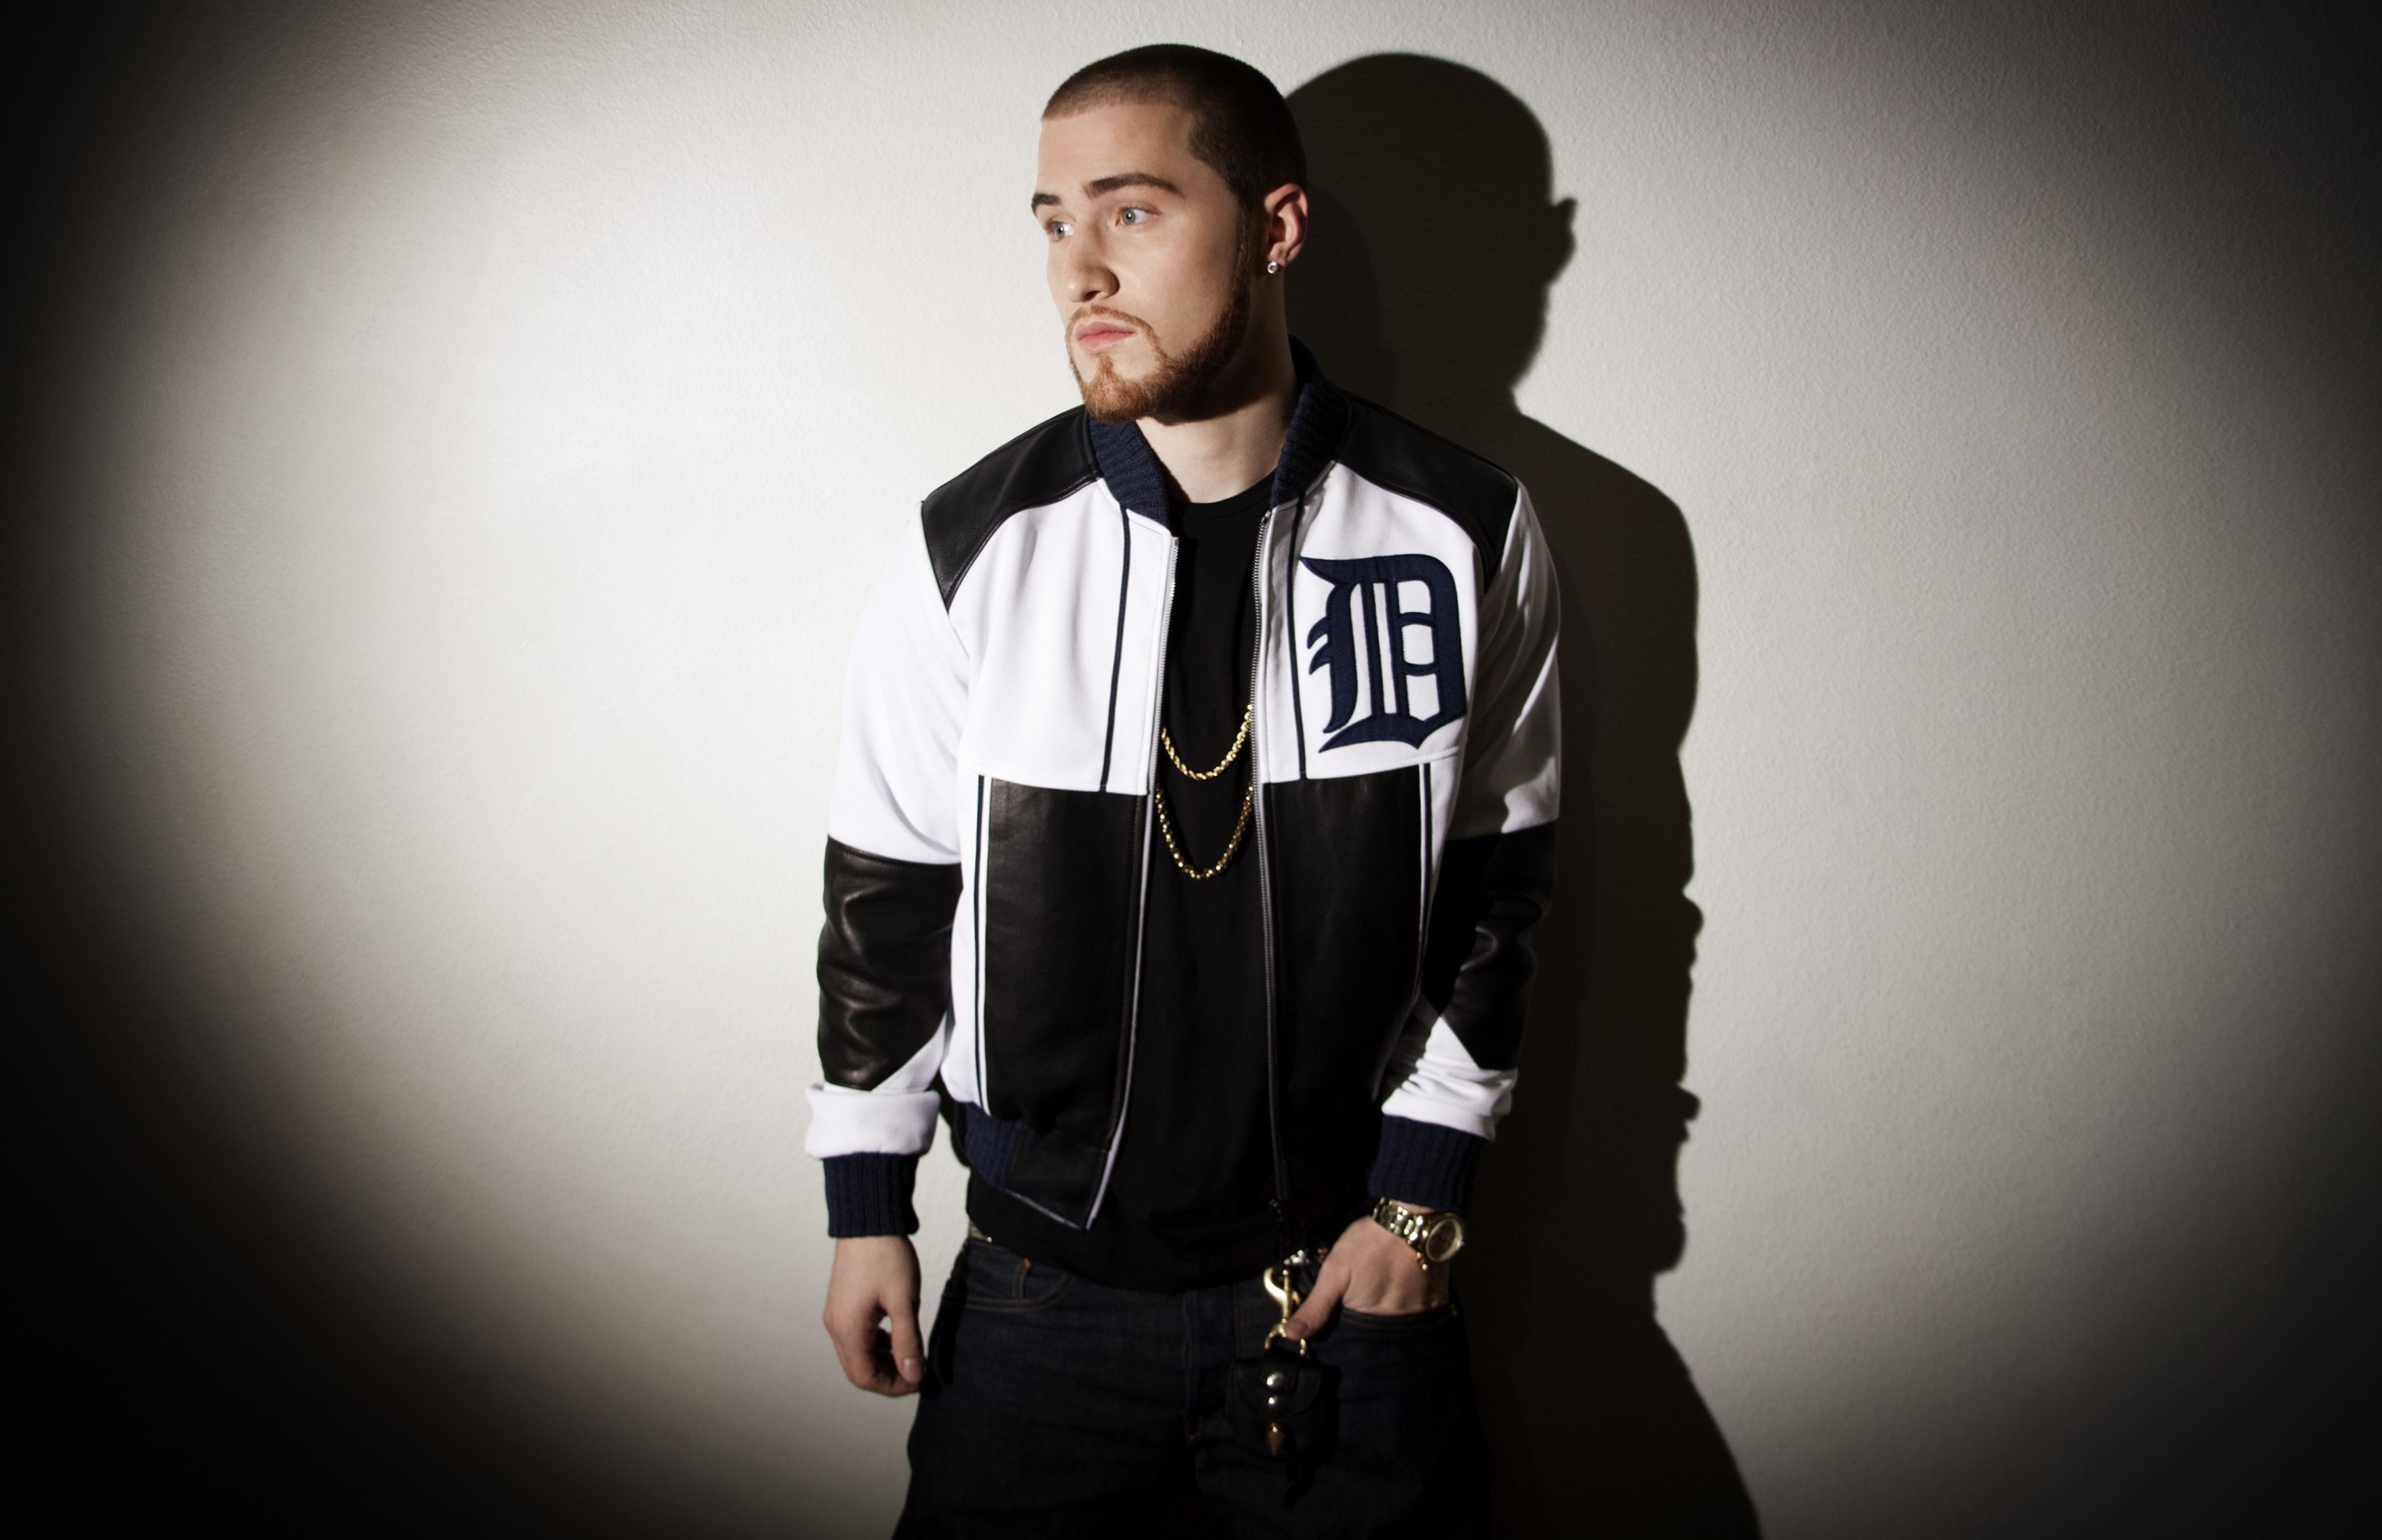 Mike Posner - Height, Weight, Age